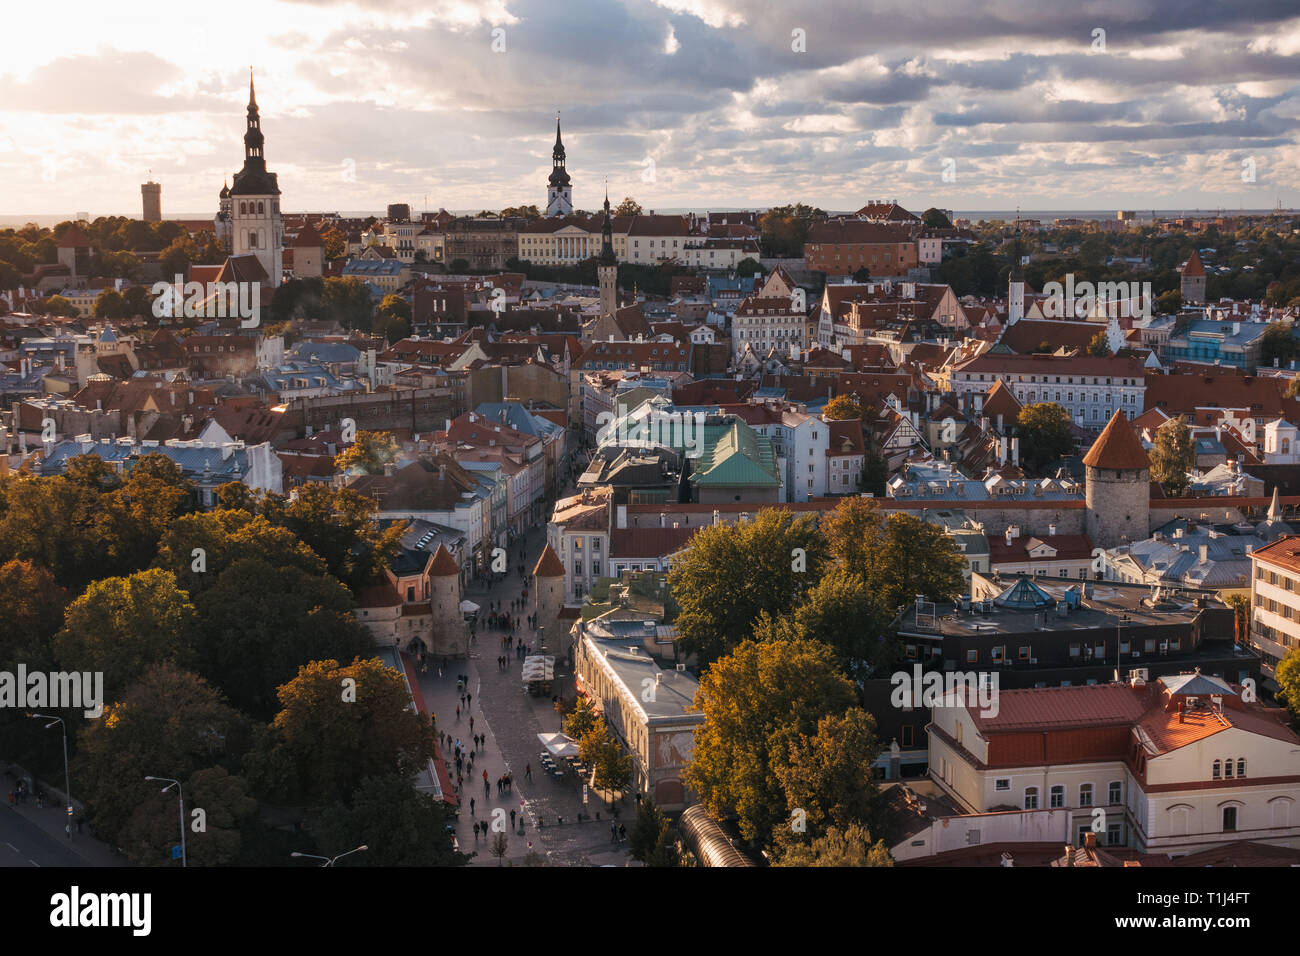 An view over the historical old town of Tallinn, Estonia, during an autumn sunset Stock Photo